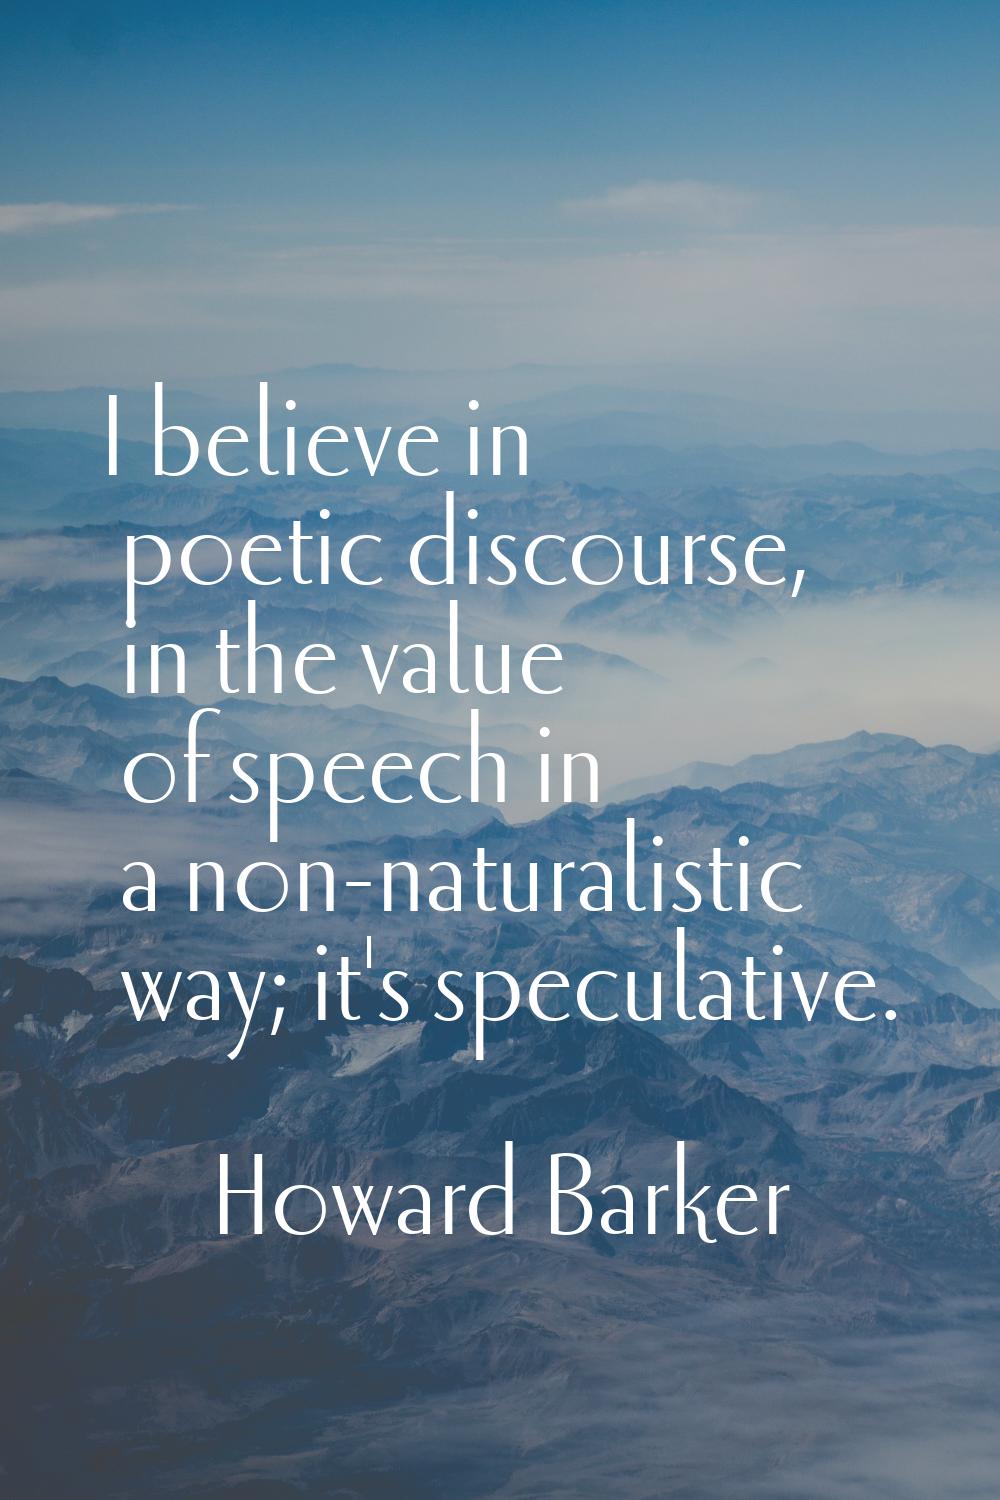 I believe in poetic discourse, in the value of speech in a non-naturalistic way; it's speculative.